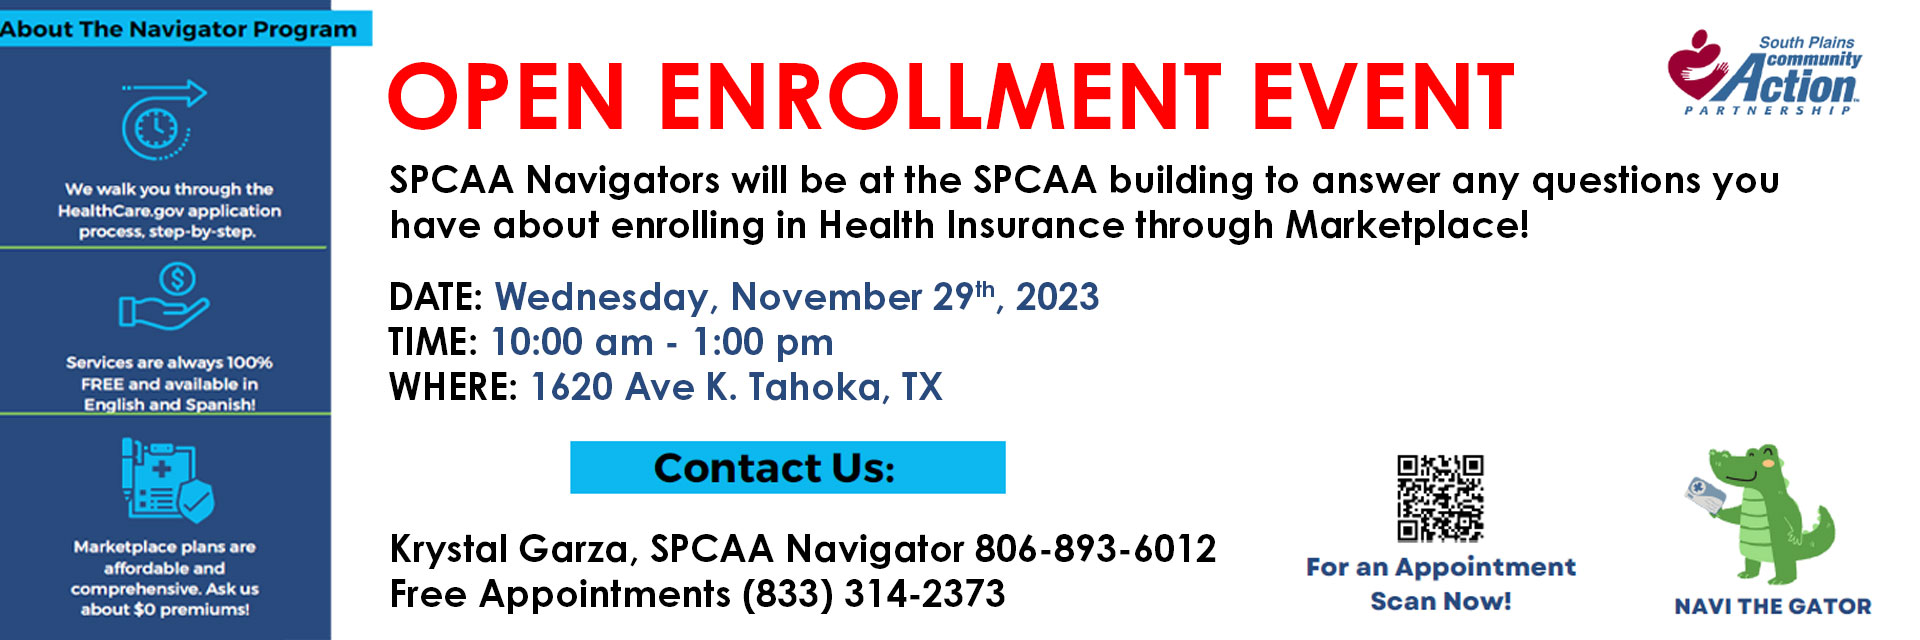 Open Enrollment Event

SPCAA Navigators will be at the SPCAA building to answer any questions you have about enrolling in Health Insurance through Marketplace!

Date: Wednesday, November 29th, 2023
Time: 10:00 am - 1:00 pm
Where: 1620 Ave K. Tahoka, TX

Contact: 
Krystal Garza, SPCAA Navigator 806-893-6012
Free Appointments (833) 314-2373